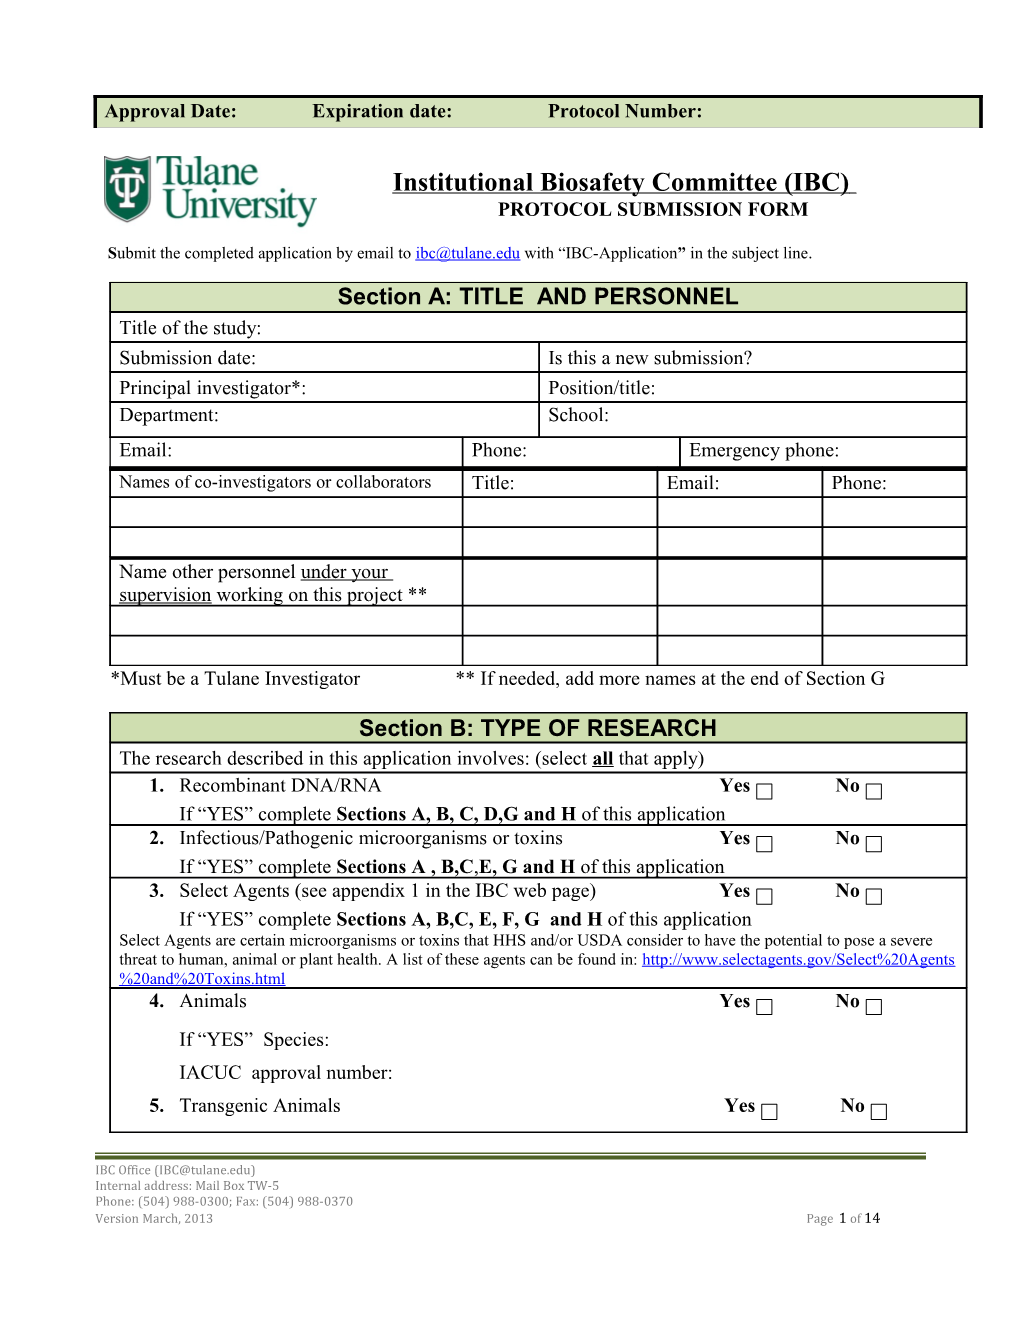 Institutional Biosafety Committee (IBC)